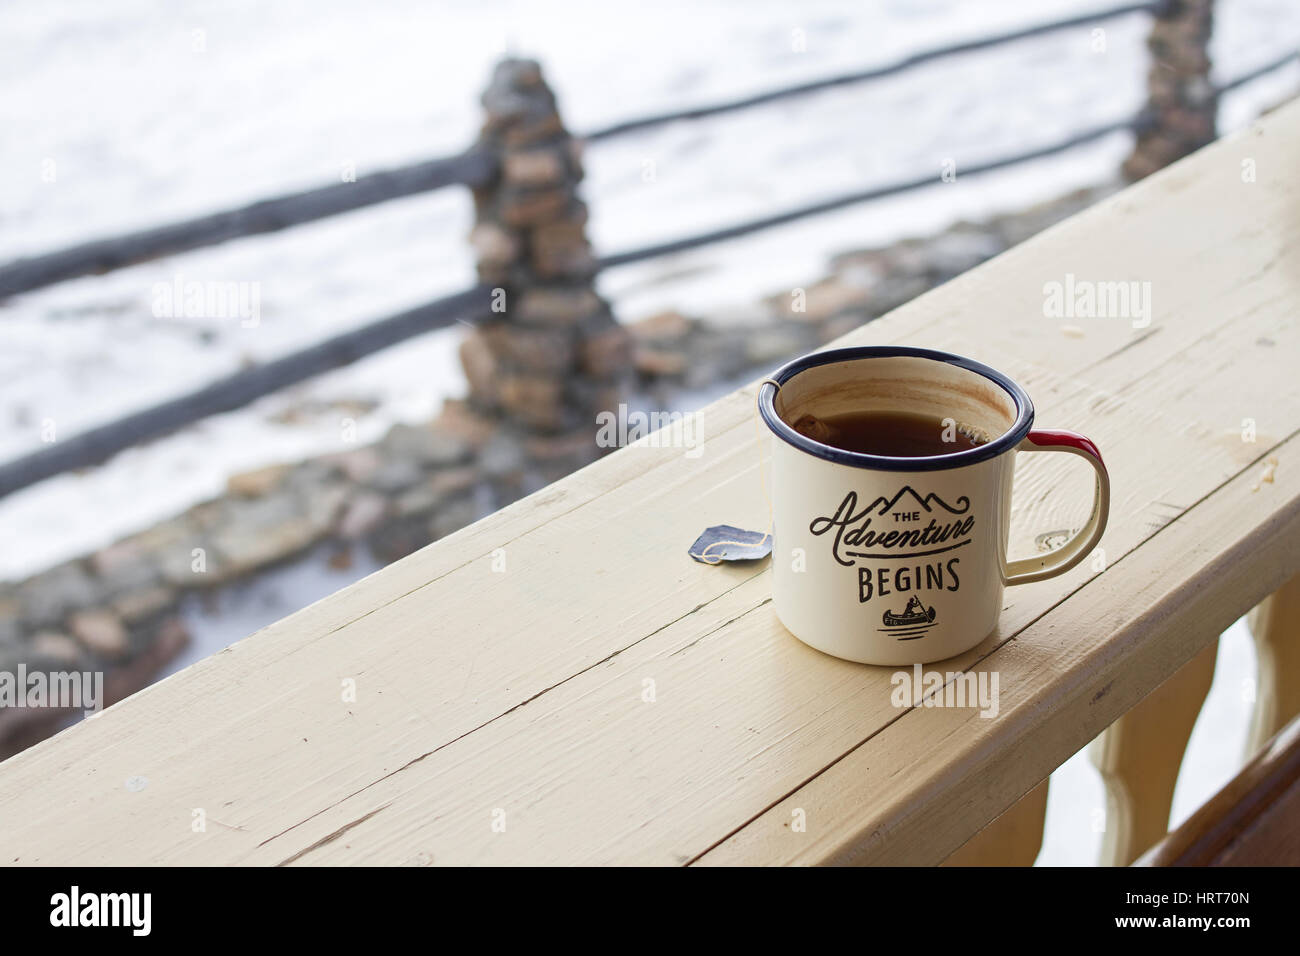 Enamel mug with strong tea and tea bag on a wooden fence on a snowy winter background. Stock Photo